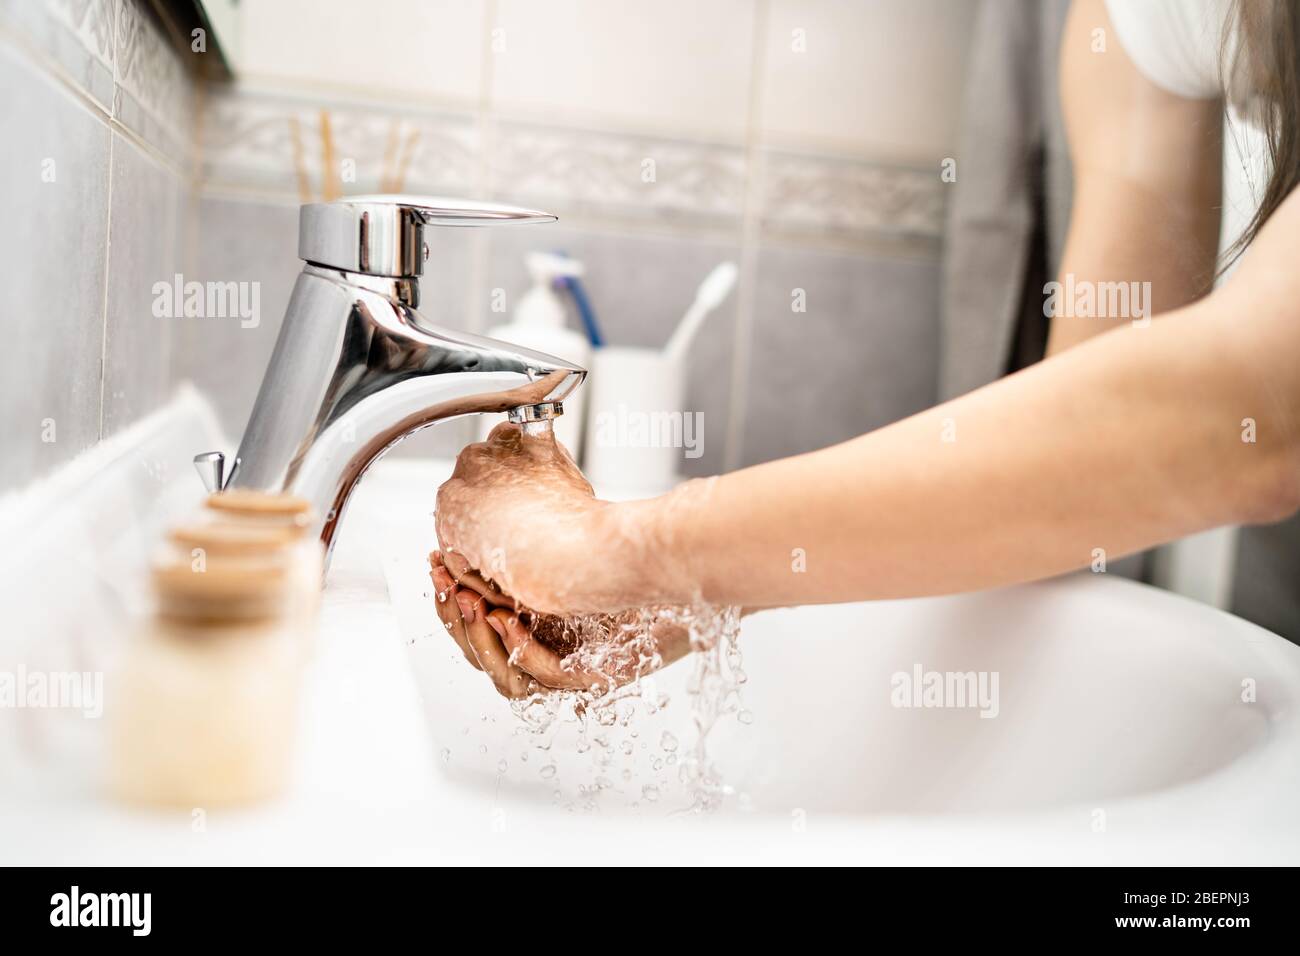 Woman washing hands with soap and water in clean bathroom.Decontamination protocol, hand hygiene routine. Cleaning hands regularly. Infectious disease Stock Photo